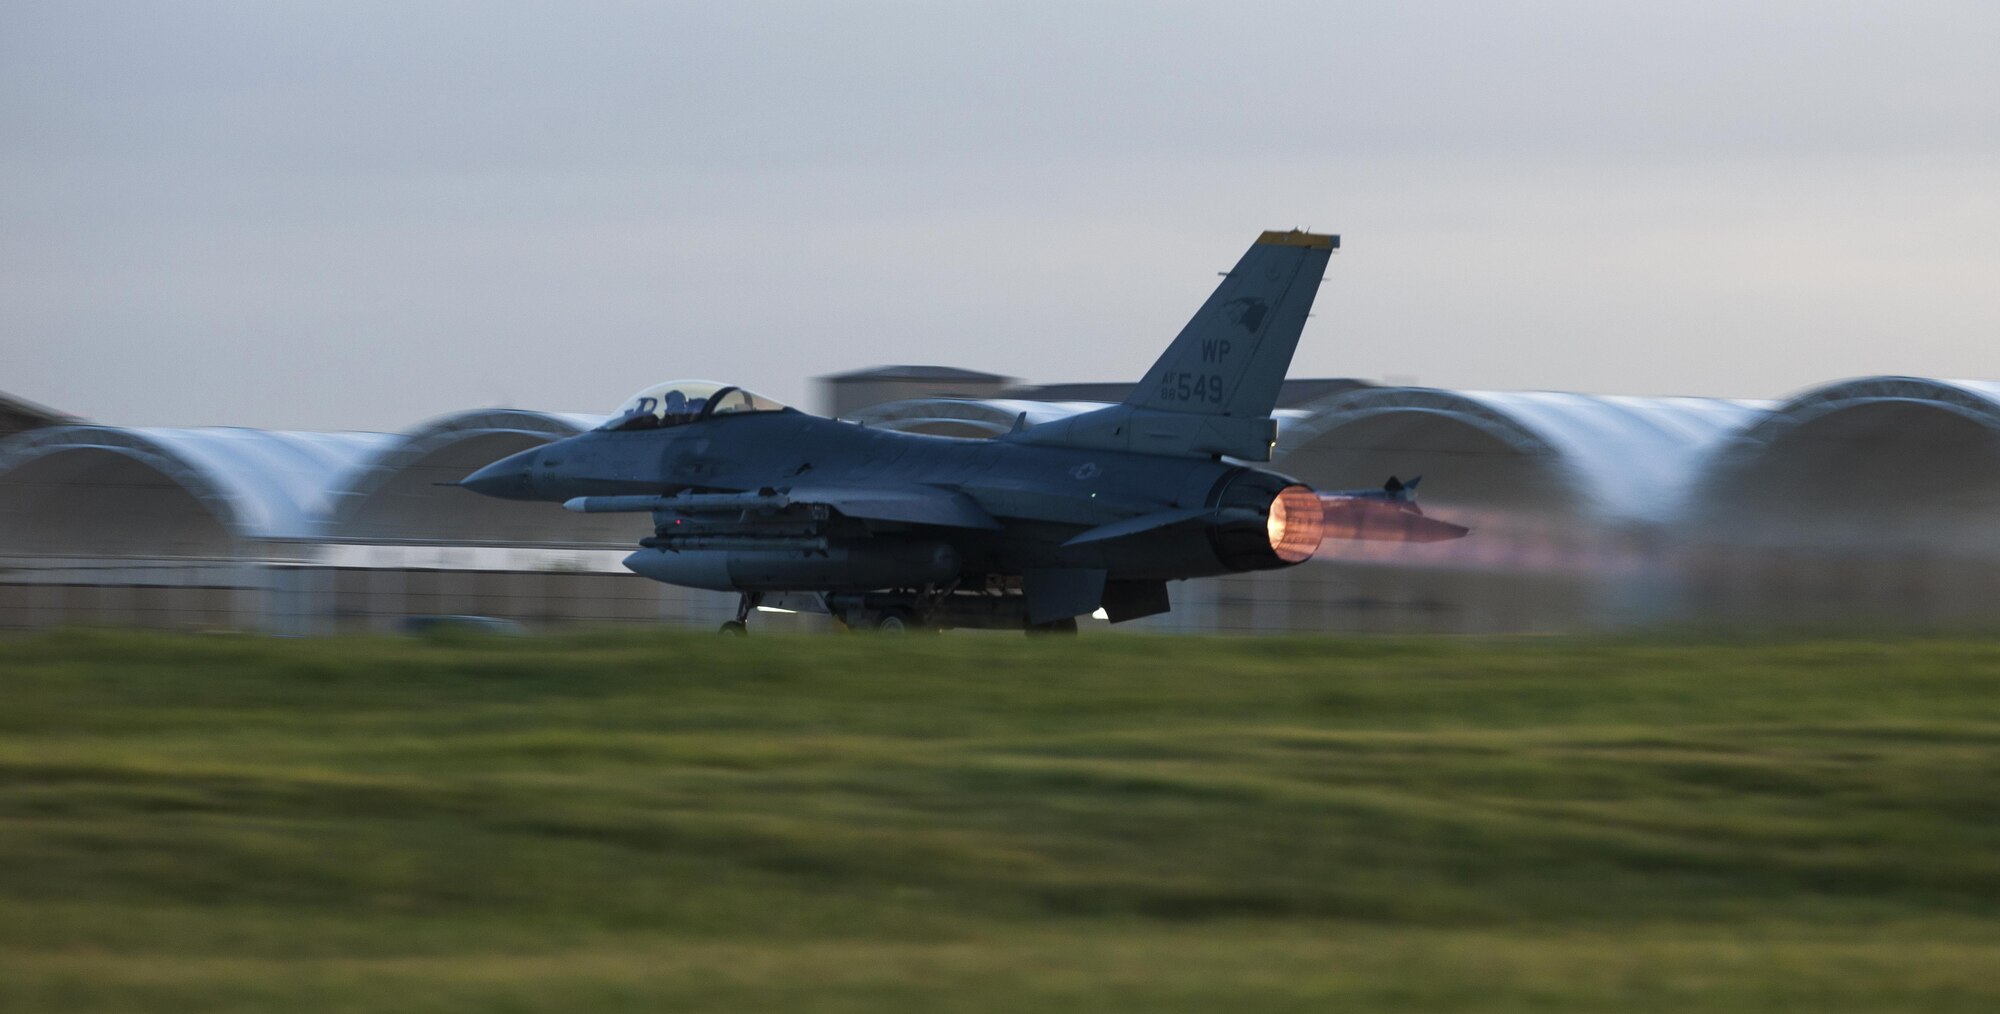 A U.S. Air Force F-16 Fighting Falcon takes off from the runway at Kunsan Air Base, Republic of Korea, Aug. 23, 2017. Airmen assigned to the 8th Fighter Wing participated in Beverly Pack 17-3, a five-day, regularly-scheduled operational readiness exercise, which tested the base’s ability to respond to various scenarios in a contingency environment. (U.S. Air Force photo by Staff Sgt. Victoria H. Taylor/Released)